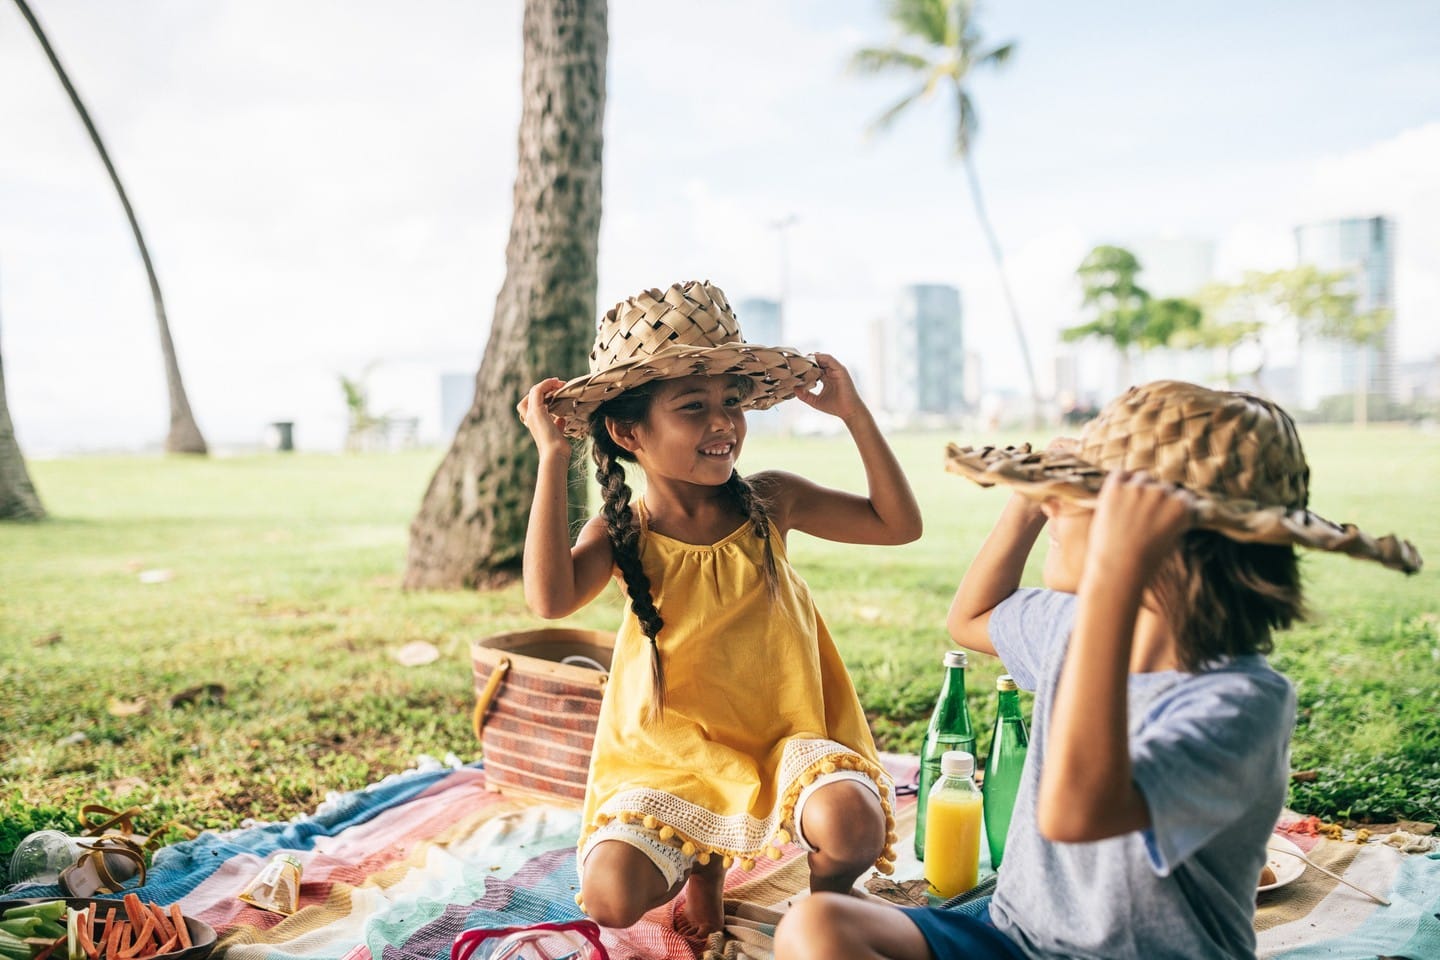 Step out in nature and enjoy a picnic in one of our spacious parks with a variety of grab-and-go offerings from your favorite neighborhood eateries throughout Ward Village.